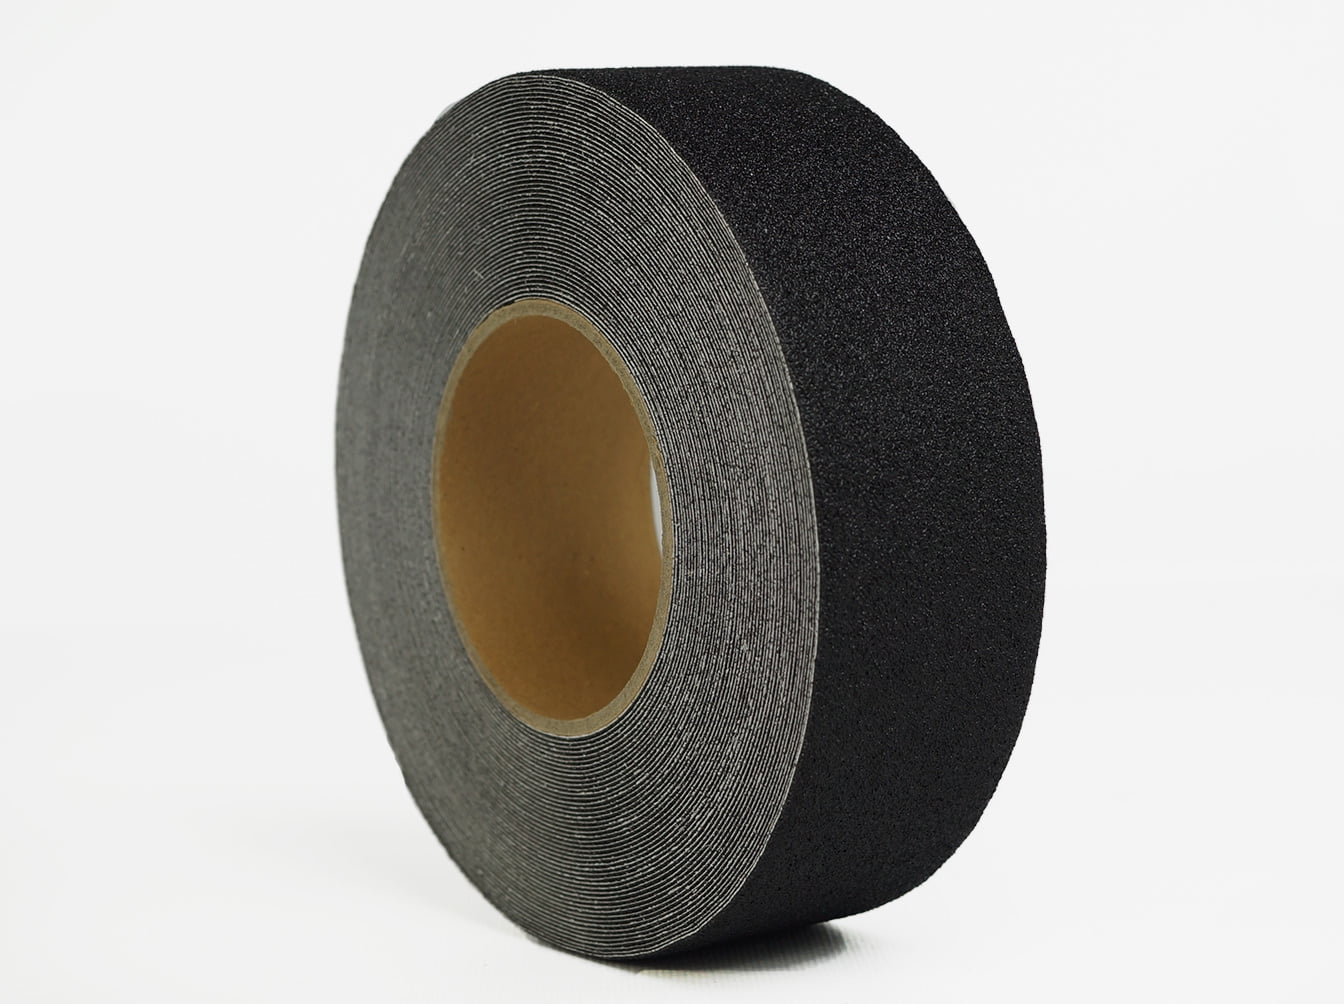 4" x 60' Black Non Skid Adhesive Tape 60 Grit Grip Anti Slip Traction Safety 